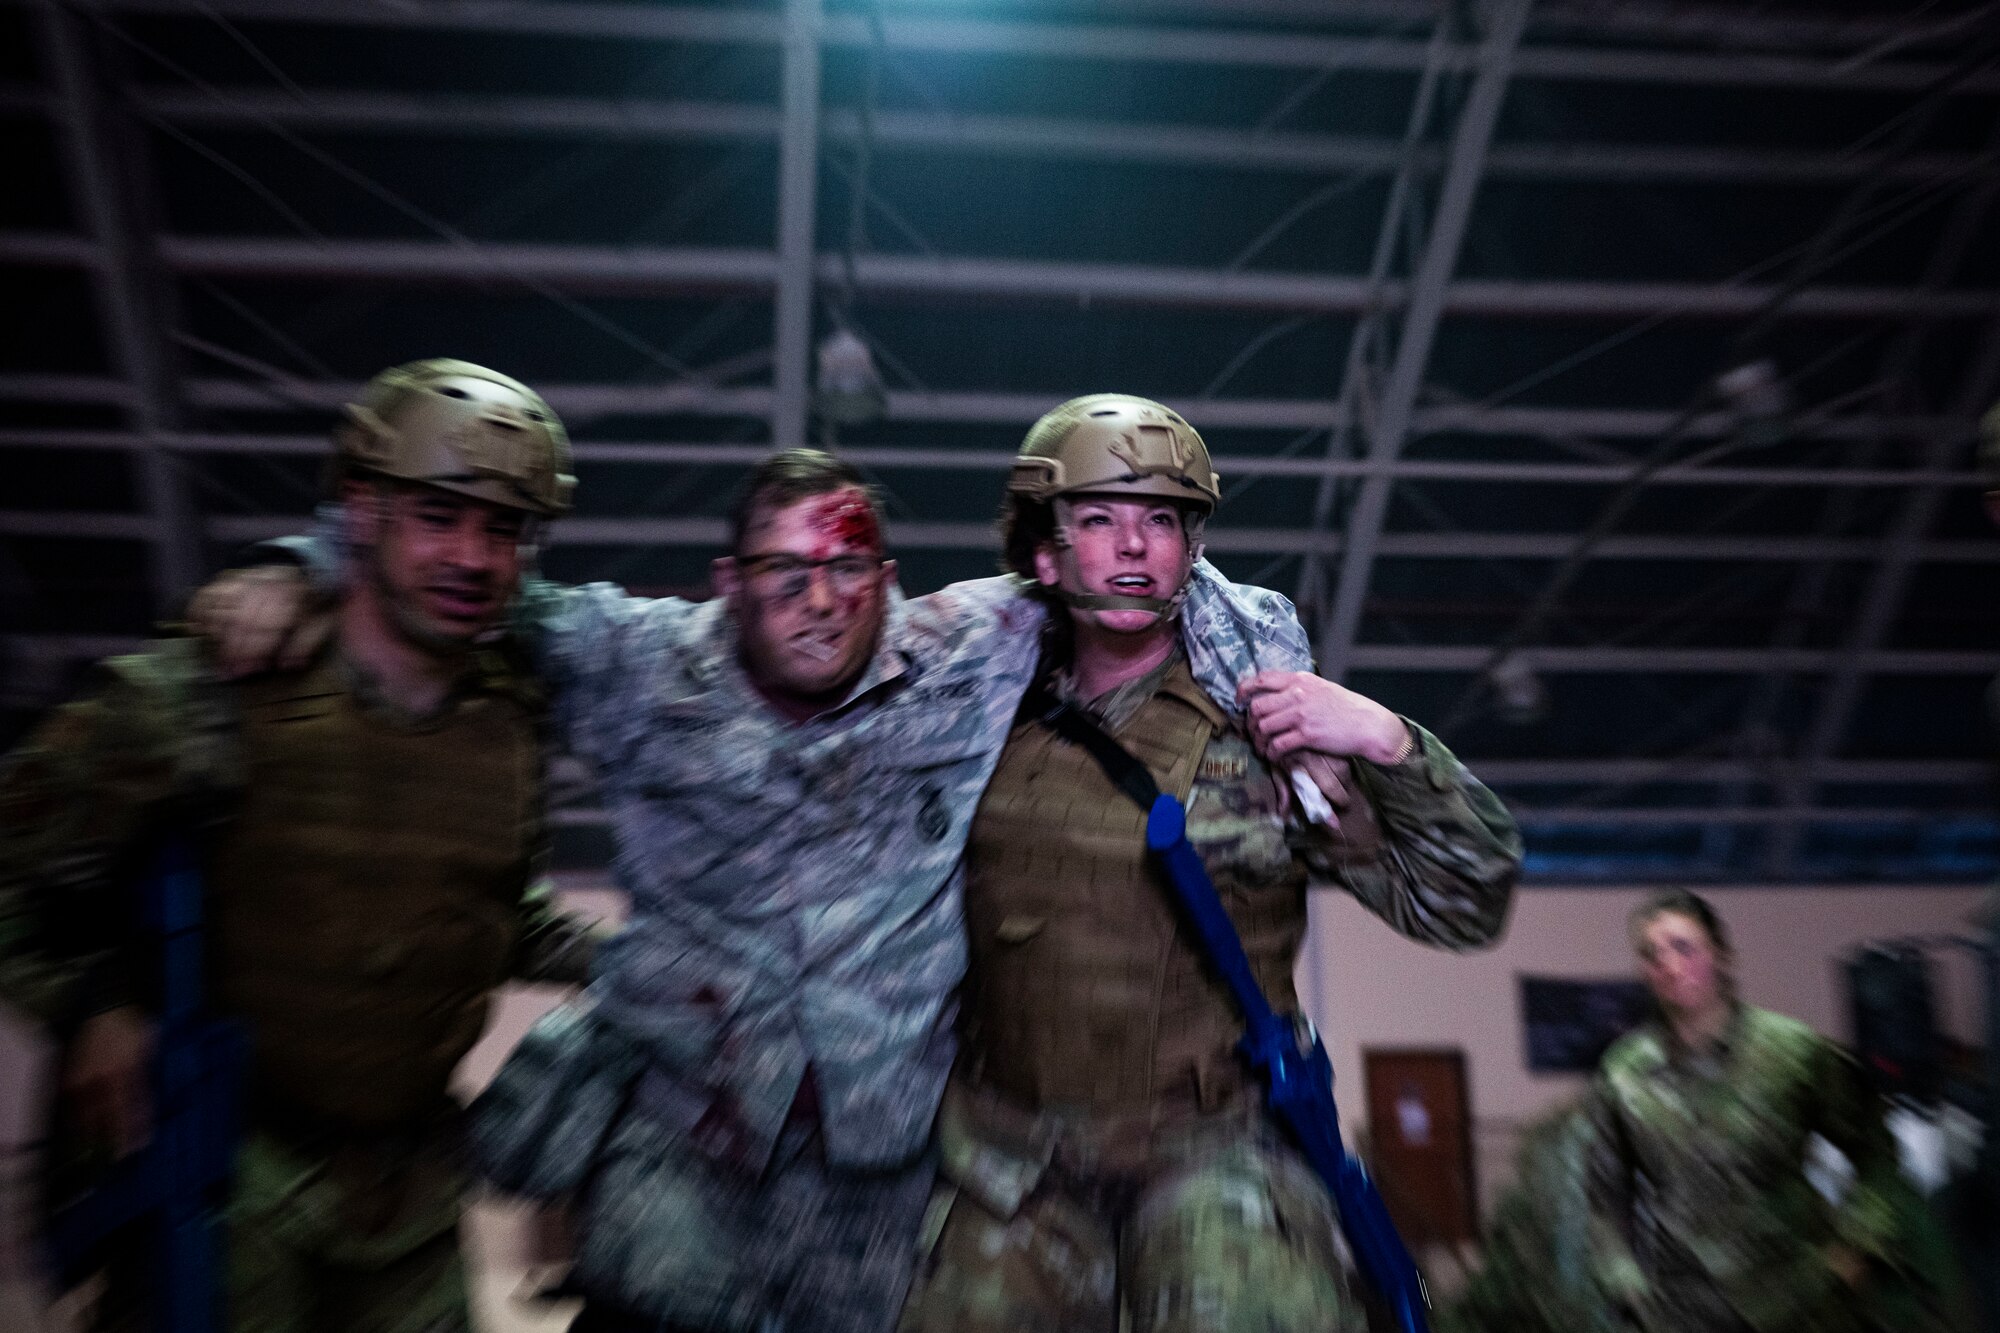 The 39th Medical Group hosted a Tactical Combat Casualty Care course open to various NATO partners at Incirlik Air Base, Turkey, March 25-26, 2022. During the course, participants learned to implement medical care under fire, tactical field care, and tactical evacuation during combat situations. The course facilitated partnerships with various NATO and joint forces, improved medical readiness, exposed medics to a unique and challenging environment and prepared both medics and non-medics to care for patients in hazardous conditions. The 39th MDG plans to provide these trainings regularly to continue bolstering partnerships and coordination among diverse teams, further expanding participants’ capabilities in the field and understanding of TCCC operations.